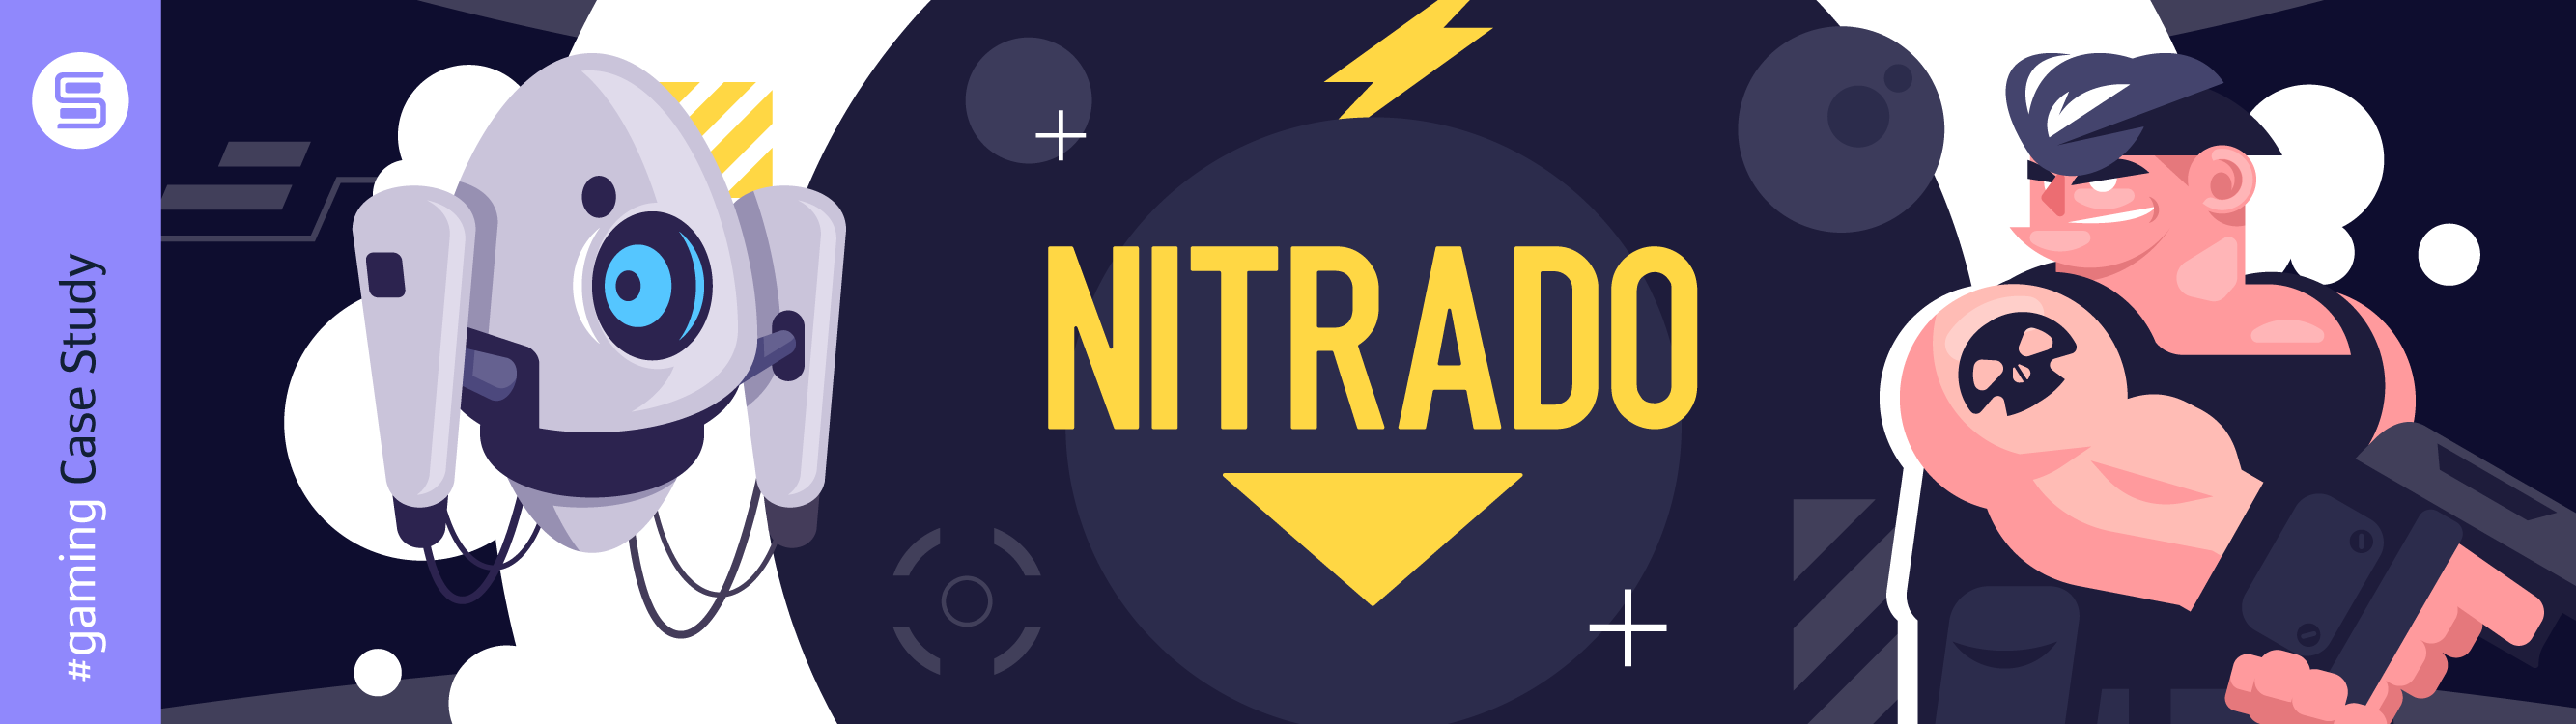 Building a seamless partnership to help Nitrado expand its support for game studios